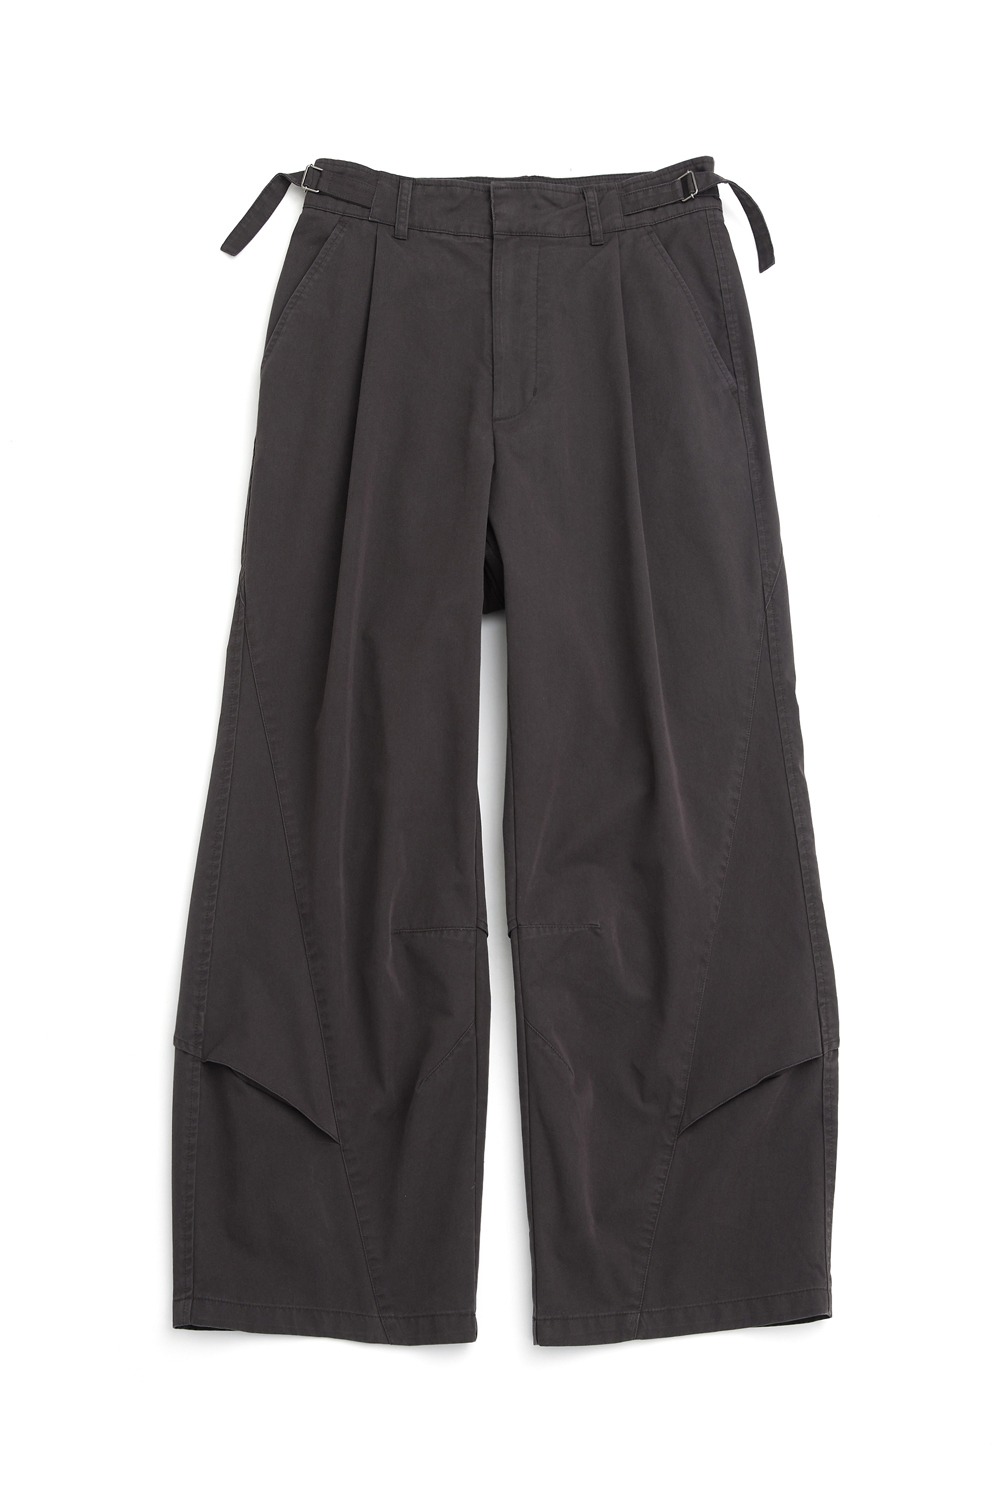 Triangle Trousers V2 Washed Dark Charcoal